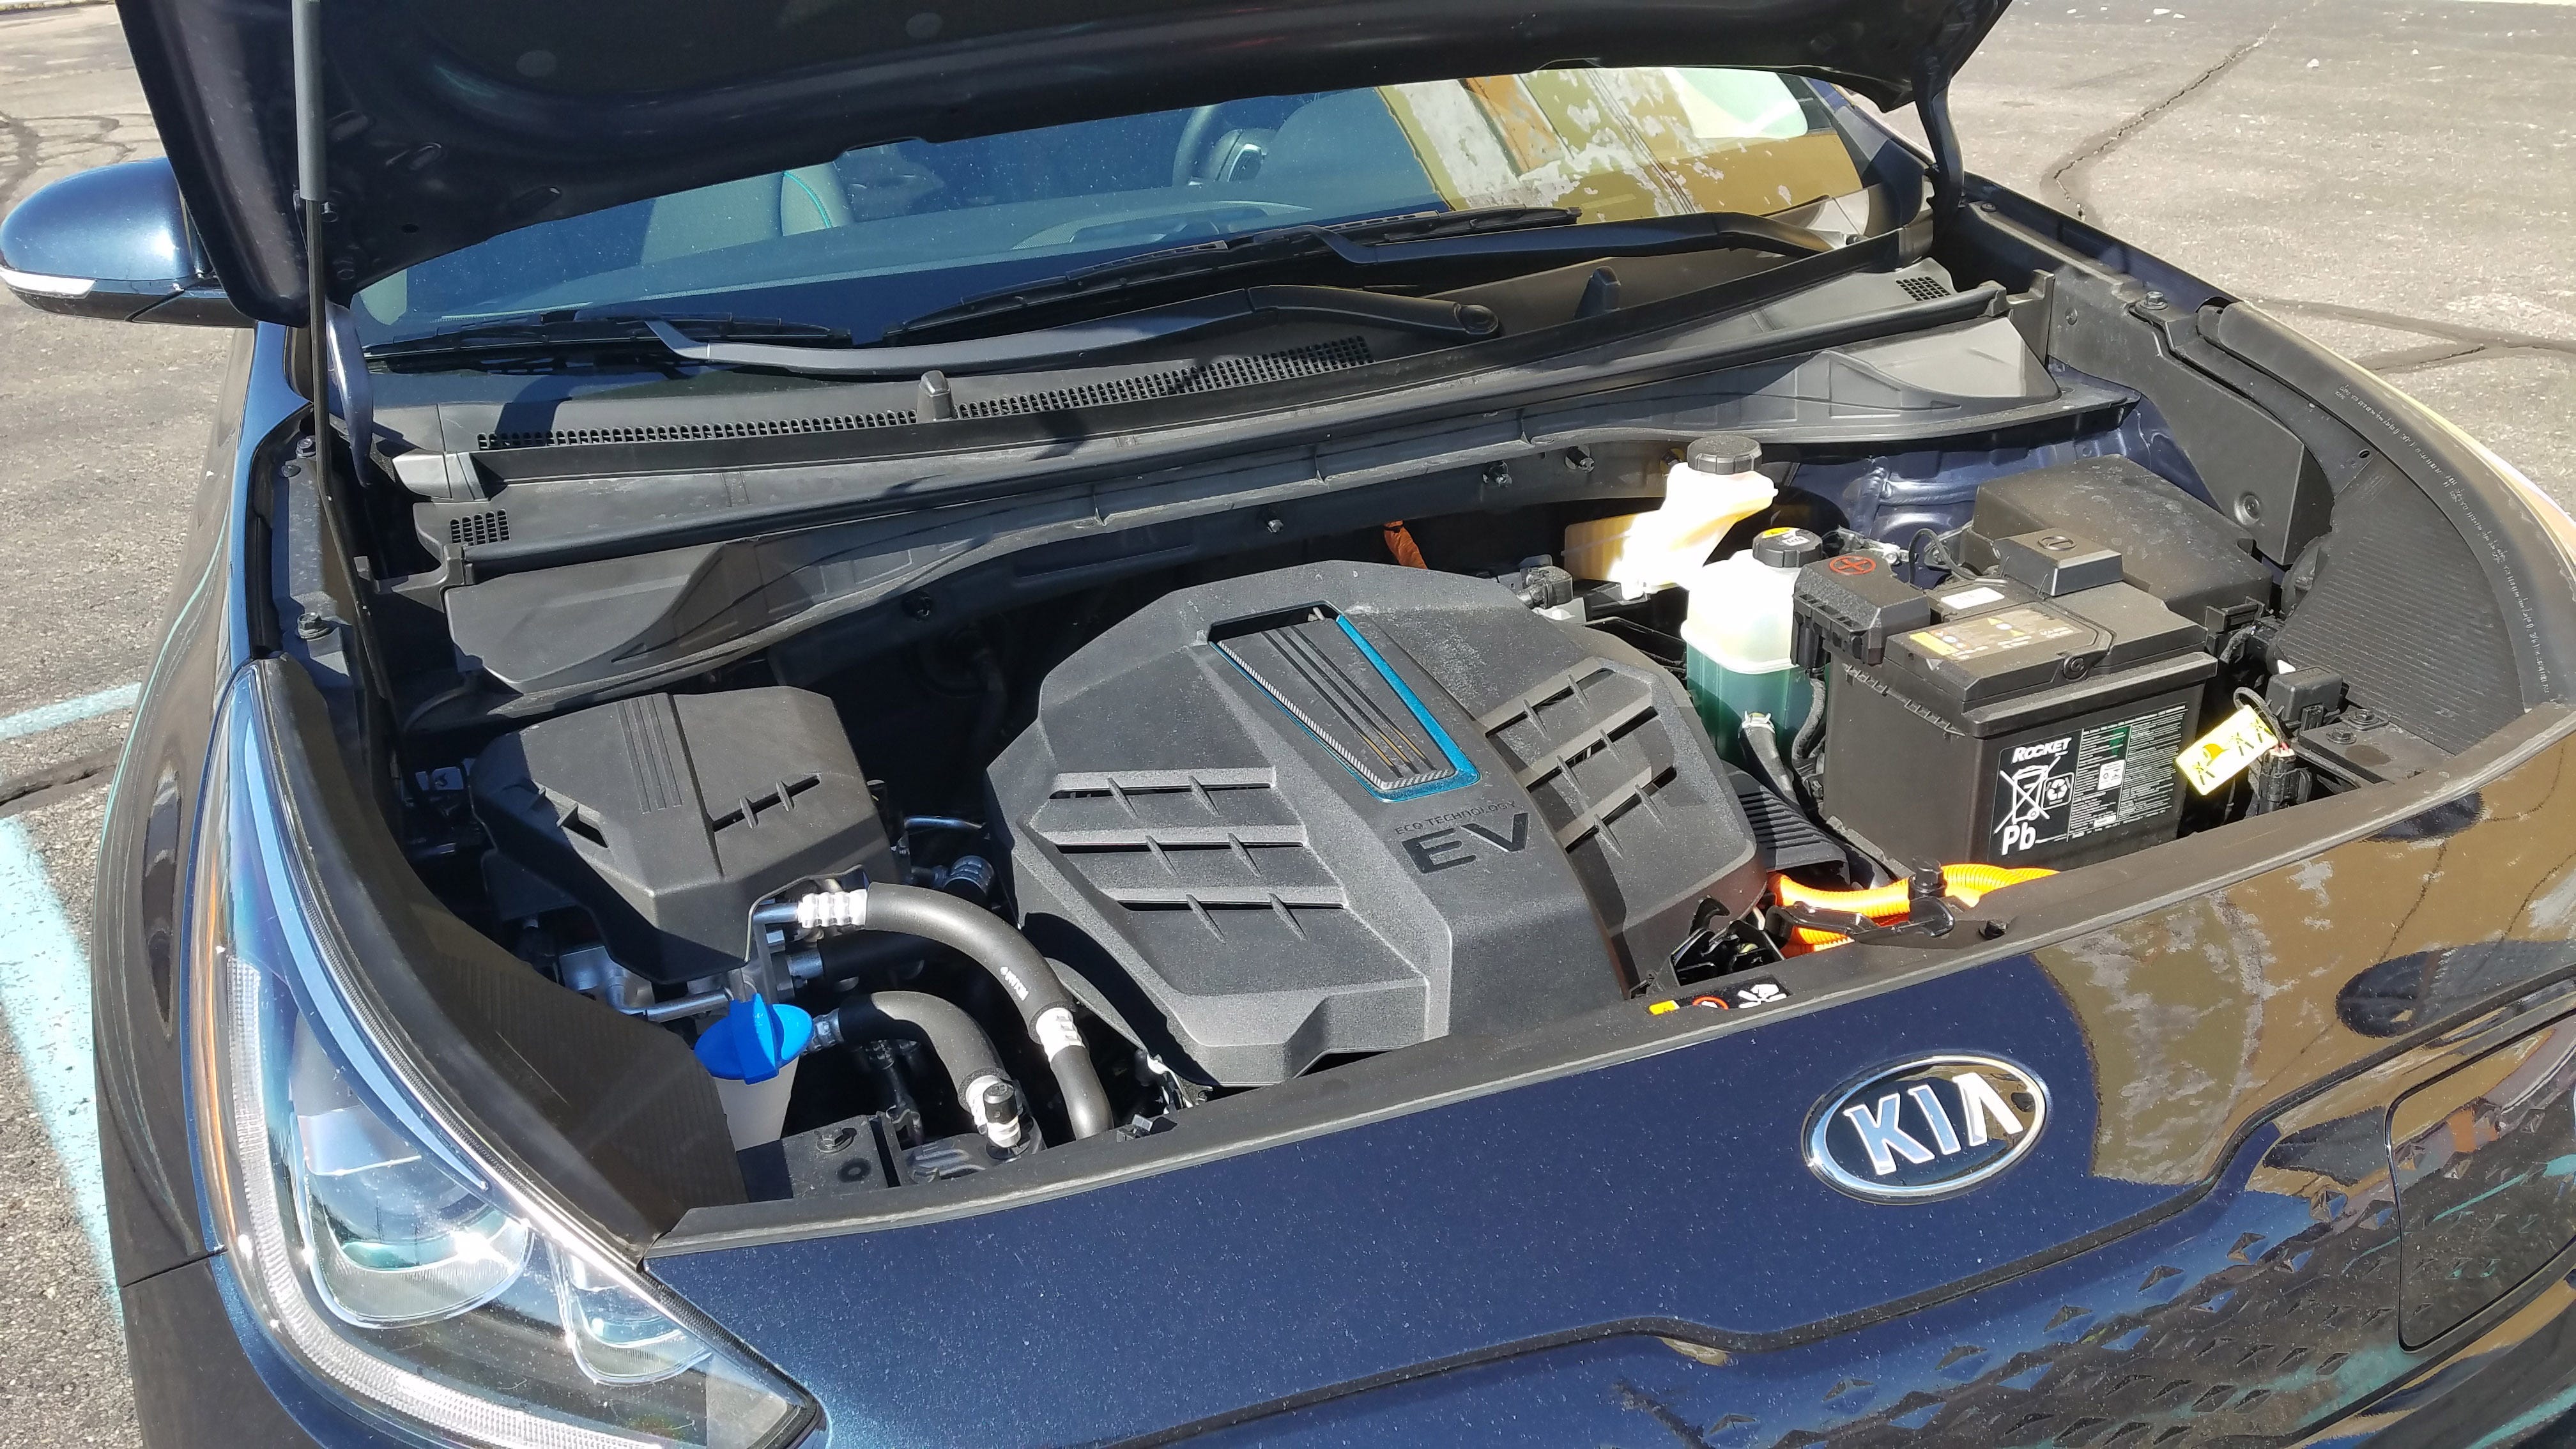 The 2019 Kia Niro EV packs its electric motor and other electronics under the front hood, where you'll find the gas engine in a standard Niro.